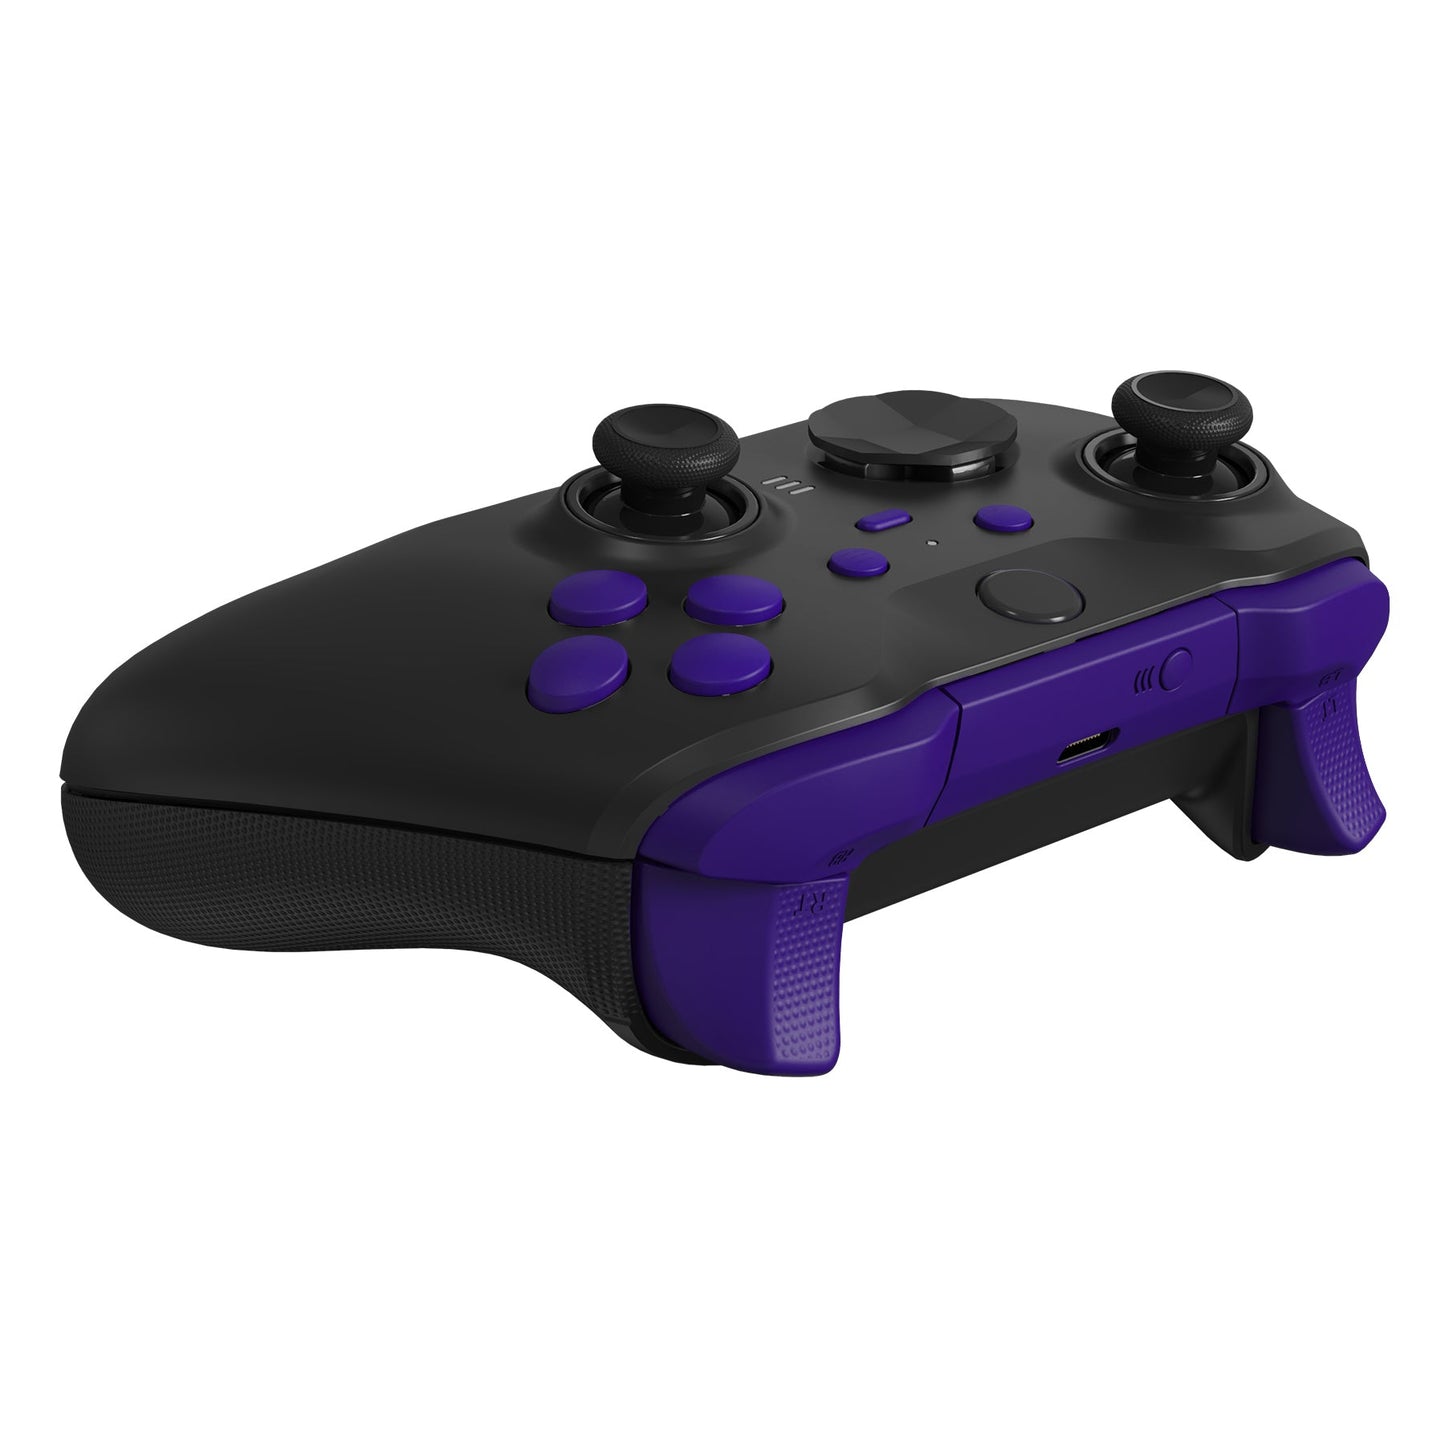 eXtremeRate Retail Purple Replacement Buttons for Xbox One Elite Series 2 Controller, LB RB LT RT Bumpers Triggers ABXY Start Back Sync Profile Switch Keys for Xbox One Elite V2 Controller (Model 1797 and Core Model 1797) - IL107